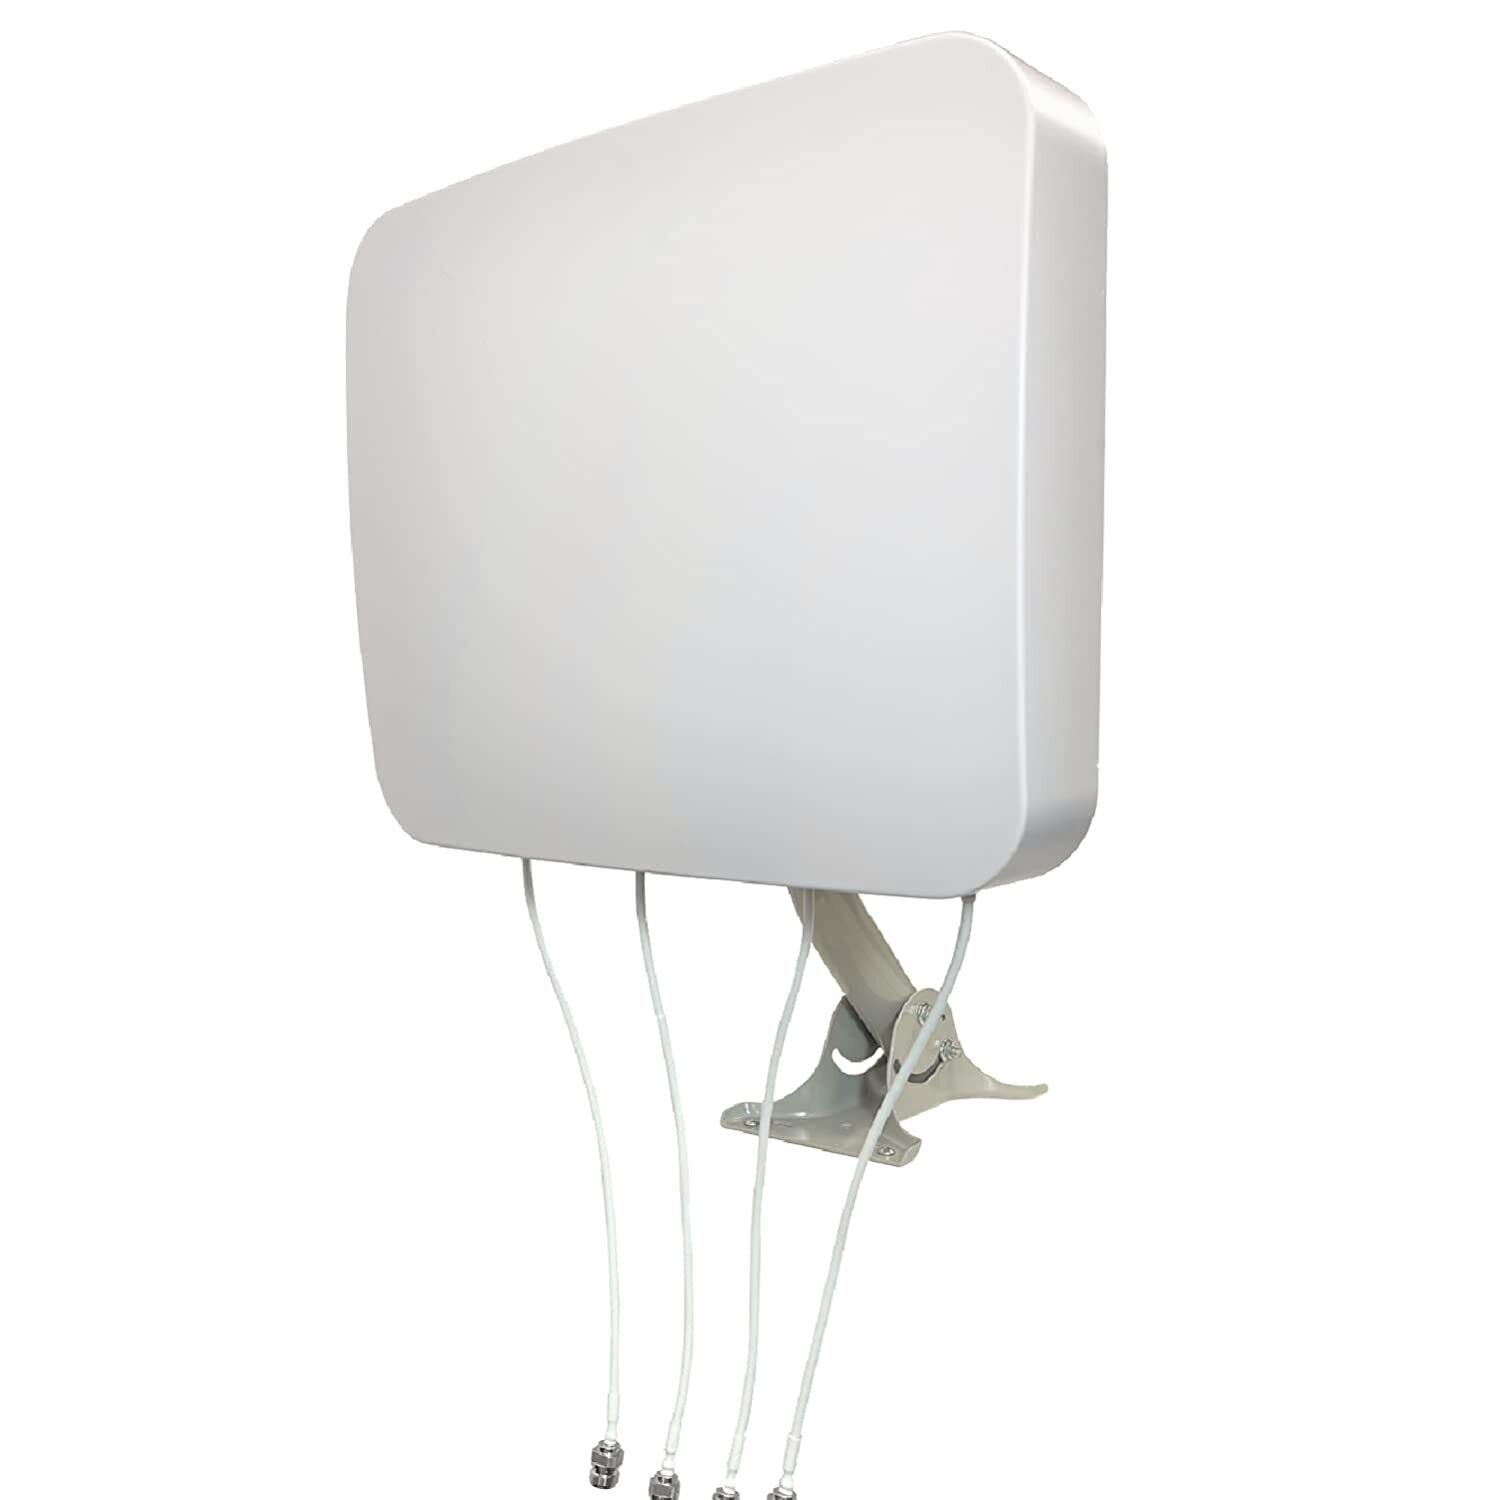 Mimo 4X4 Panel External Antenna For 4G Lte/5G Hotspots & Routers (Antenna Only)